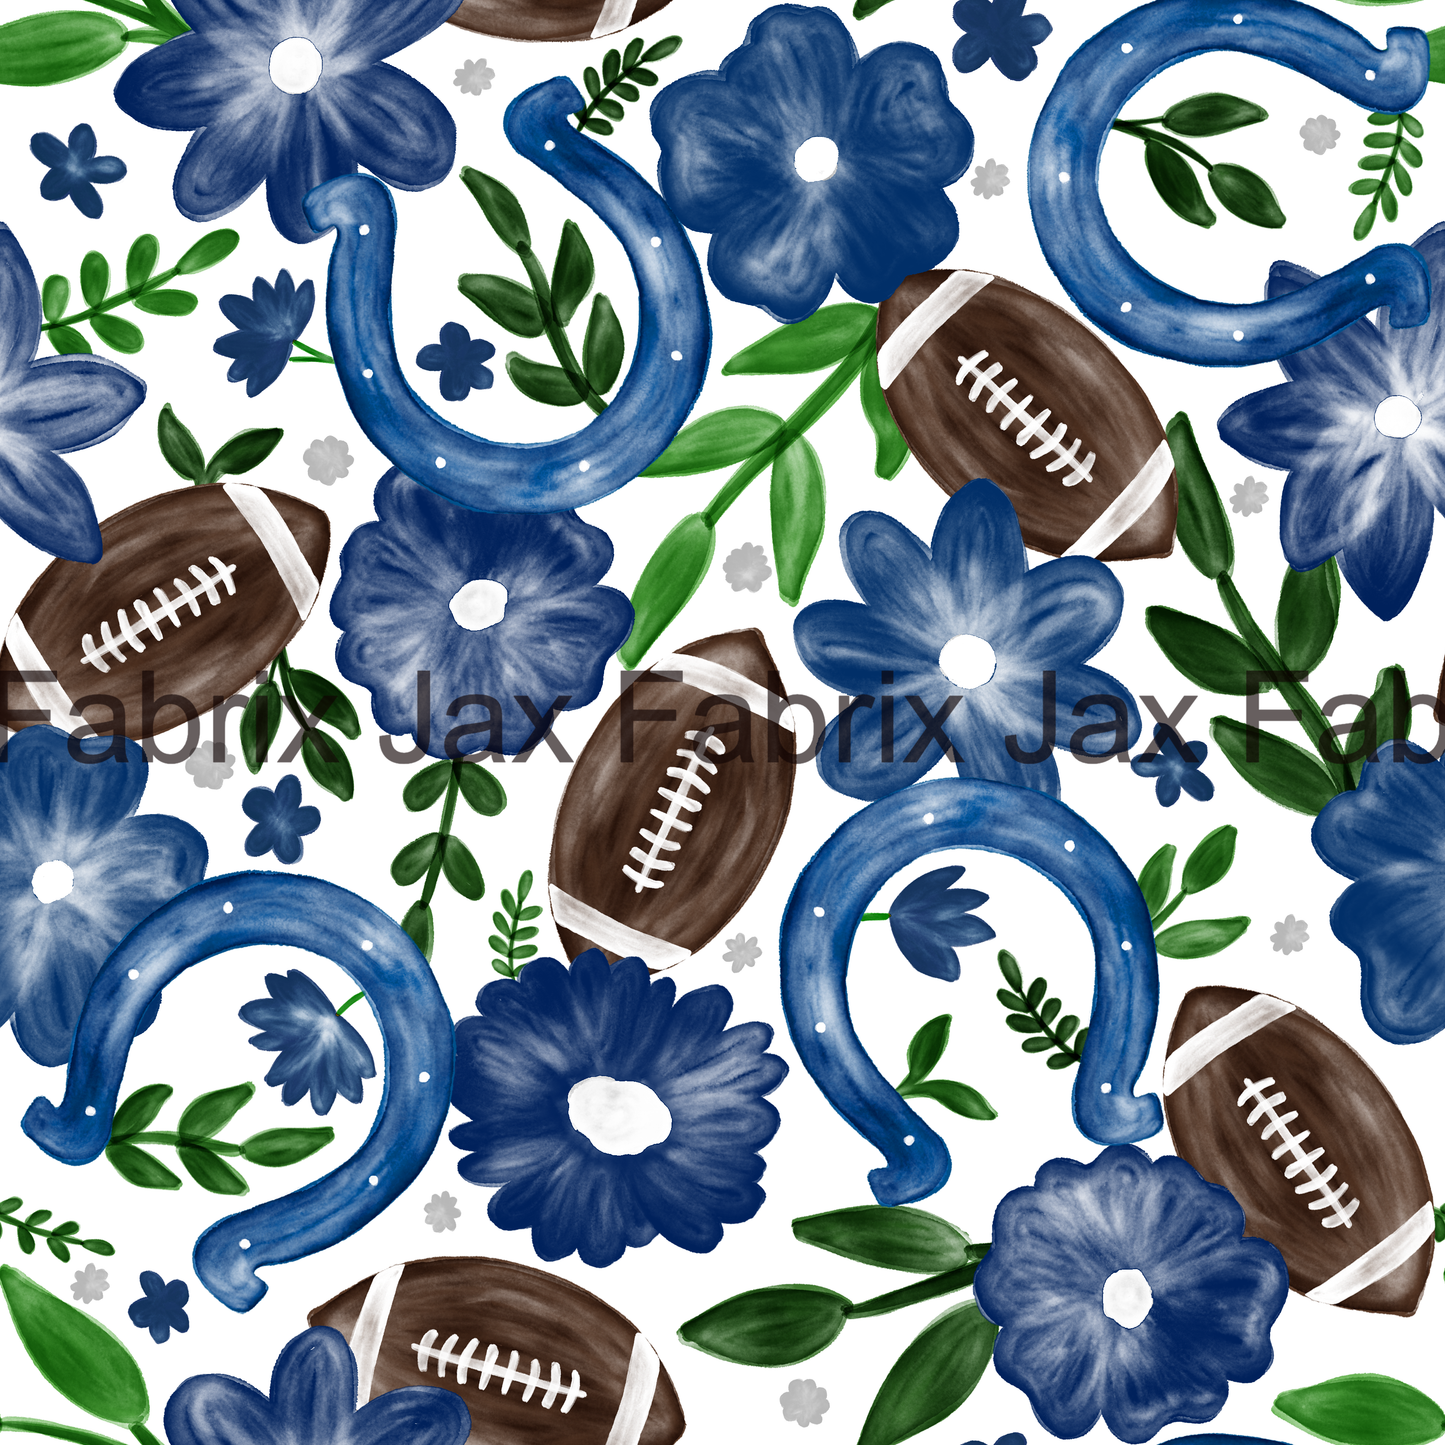 Colts Football Floral Watercolor RAE75